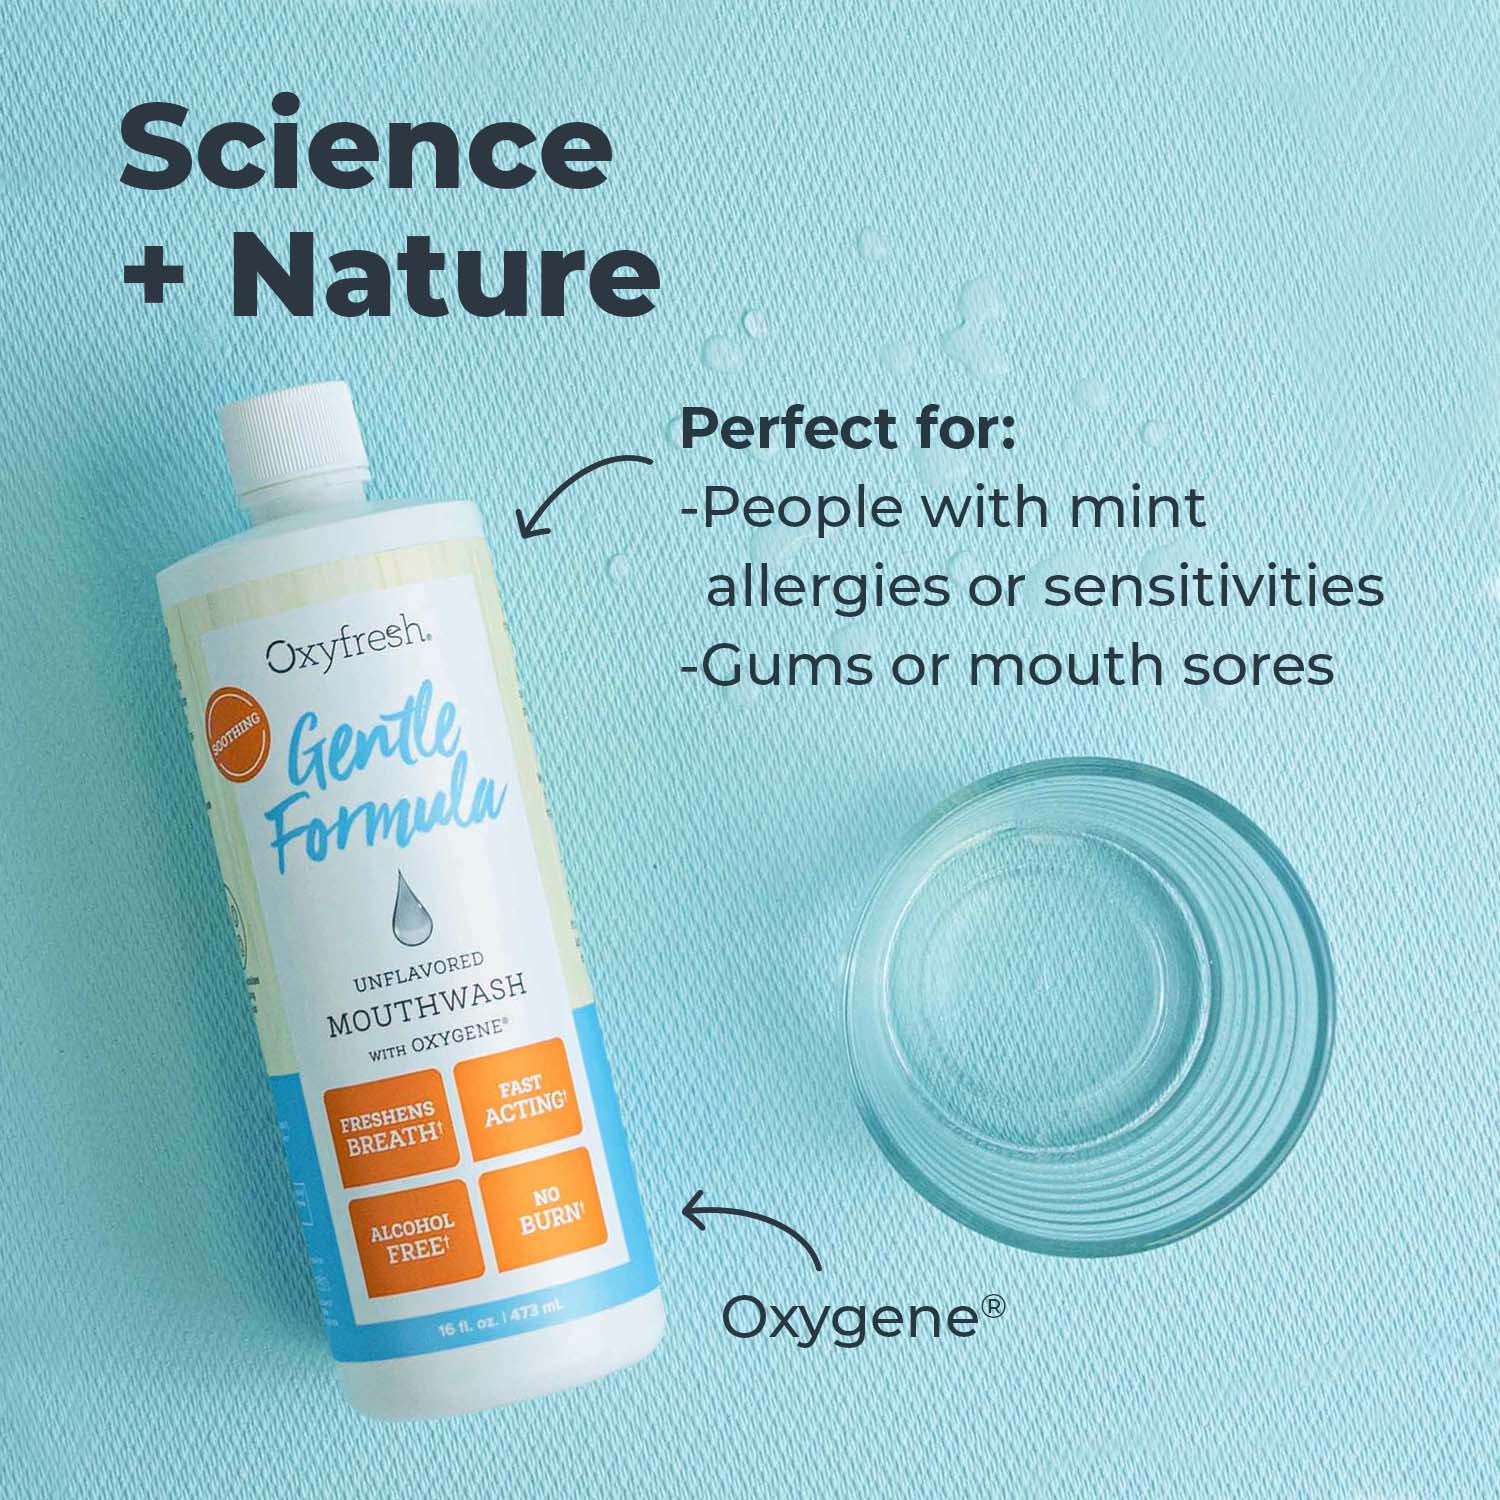 Oxyfresh-gentle-formula-mouthwash-science-and-nature-perfect-for:-people-with-mint-allergies-or-sensitivities-and-gums-or-mouth-sores